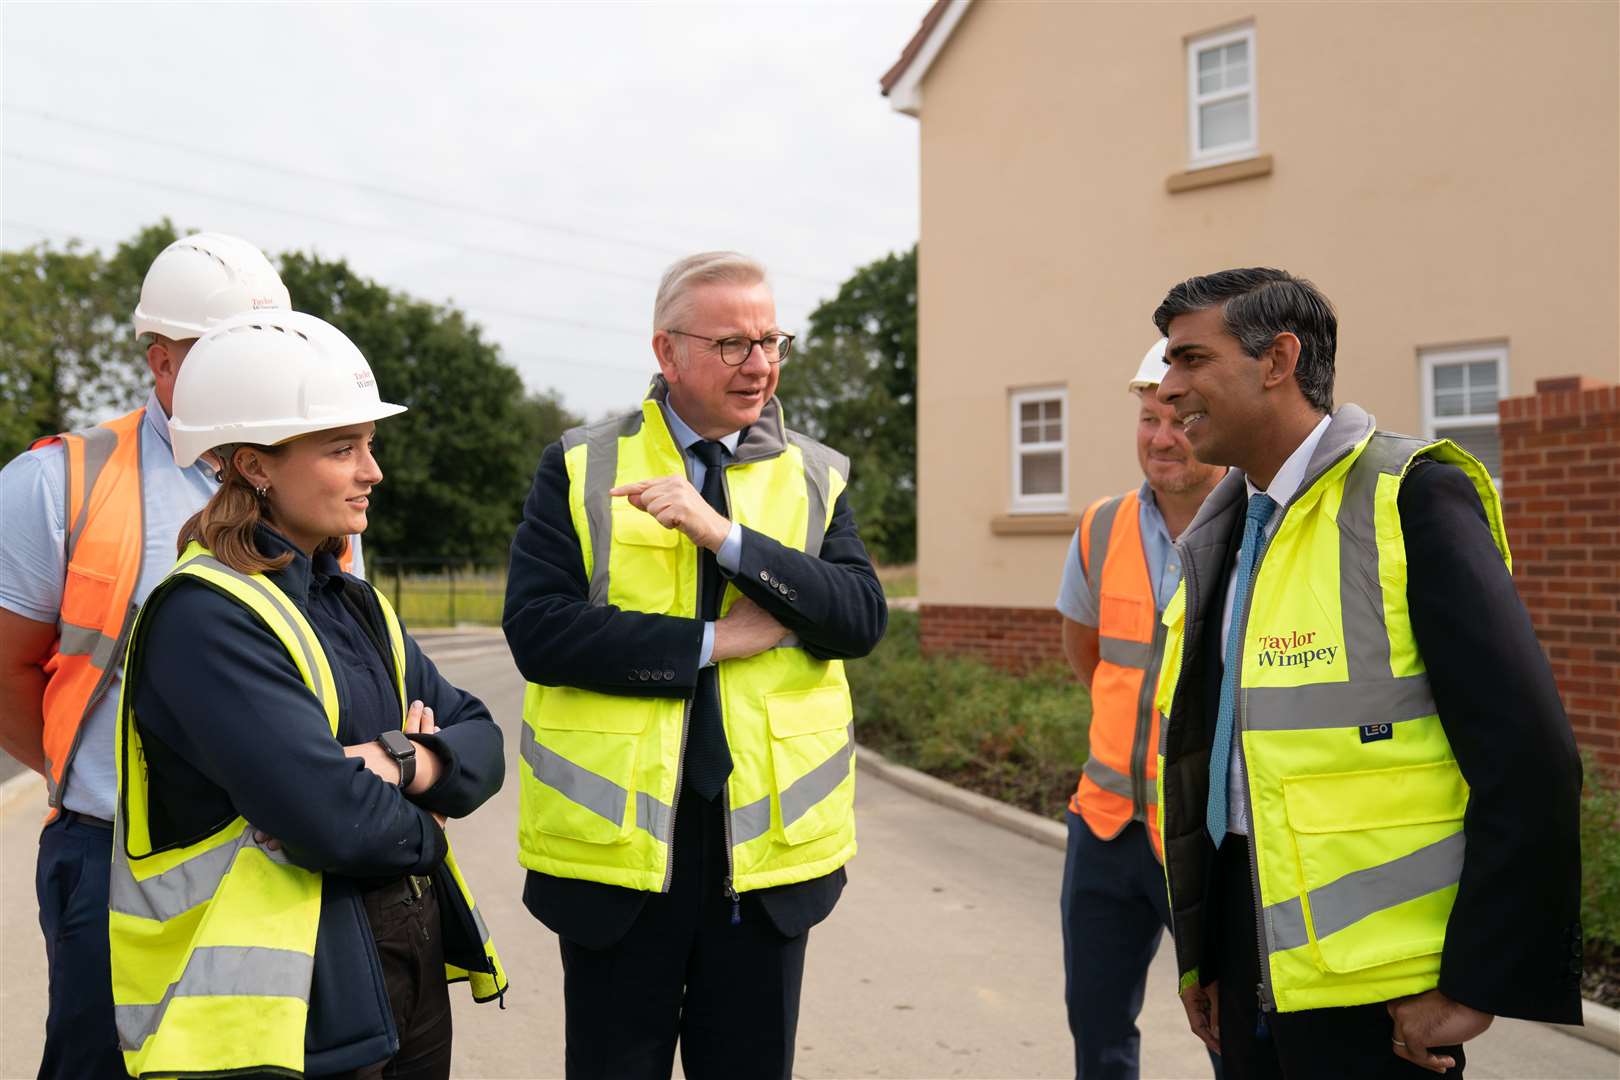 Housing Secretary Michael Gove and Prime Minister Rishi Sunak announced the Government’s policy change during a visit to a housing development in Norfolk (Joe Giddens/PA)